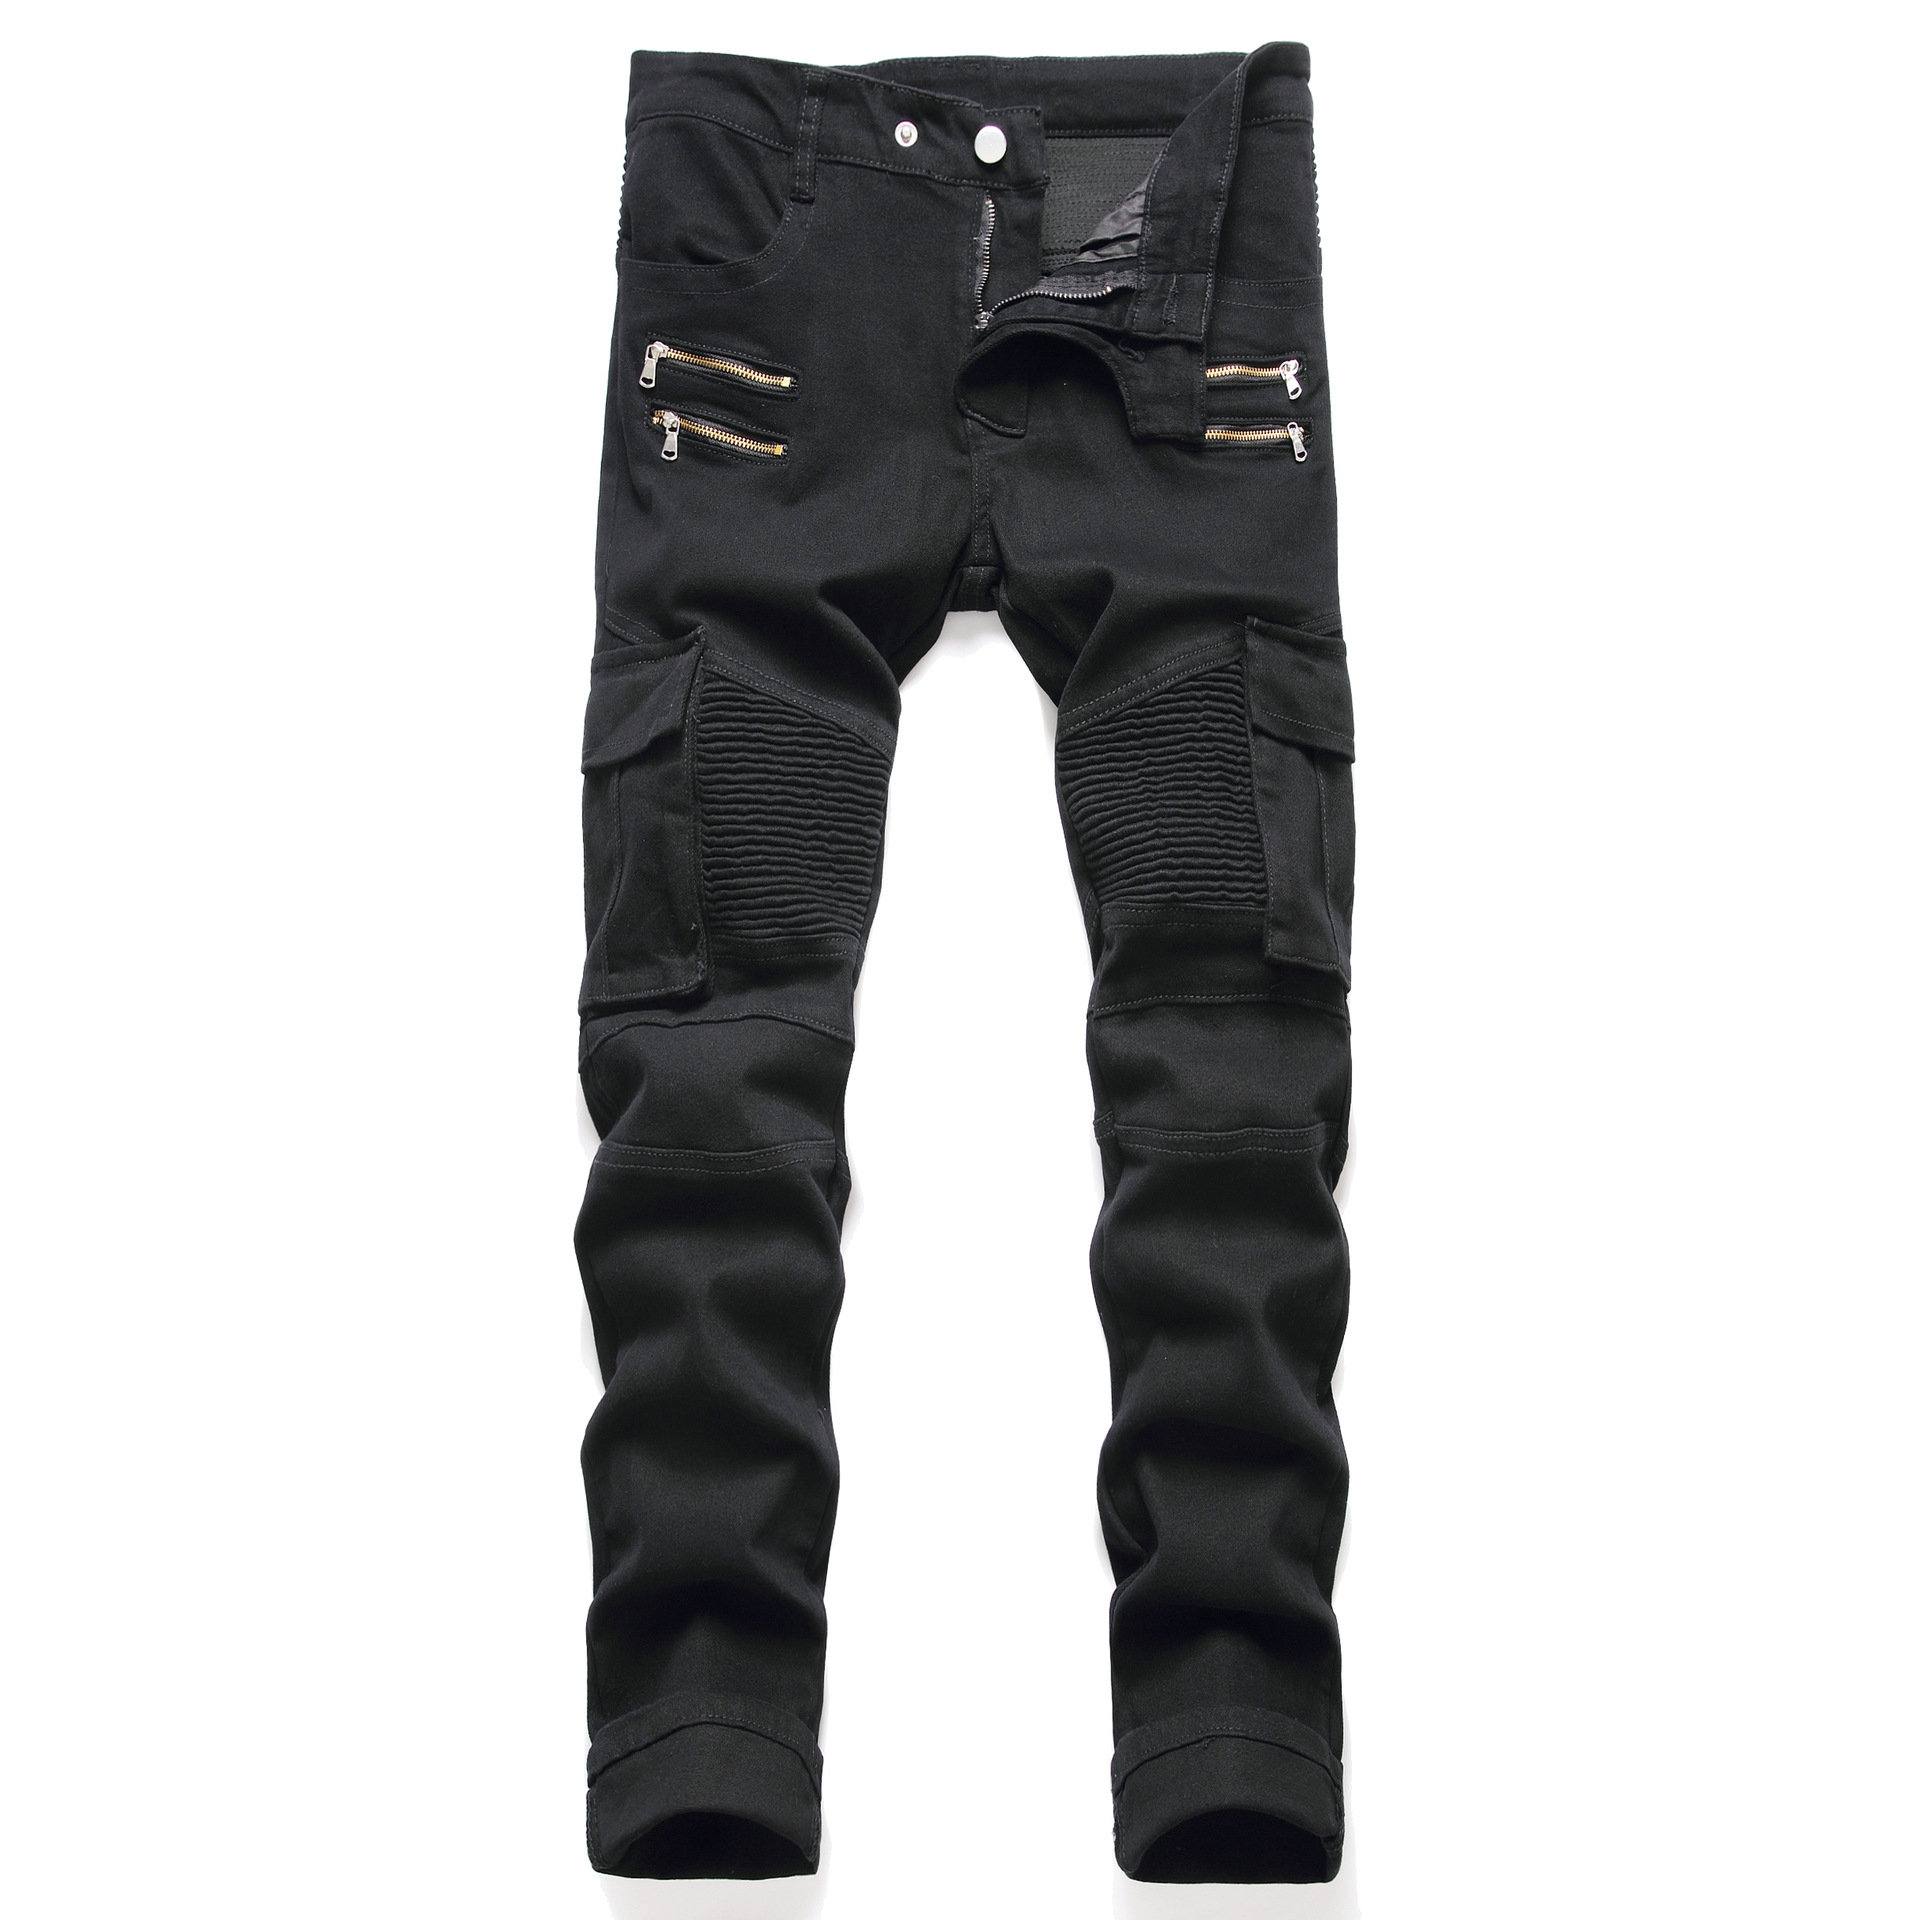 Men's Outdoor Bike Riding Chic Multi-band Tactical Jeans